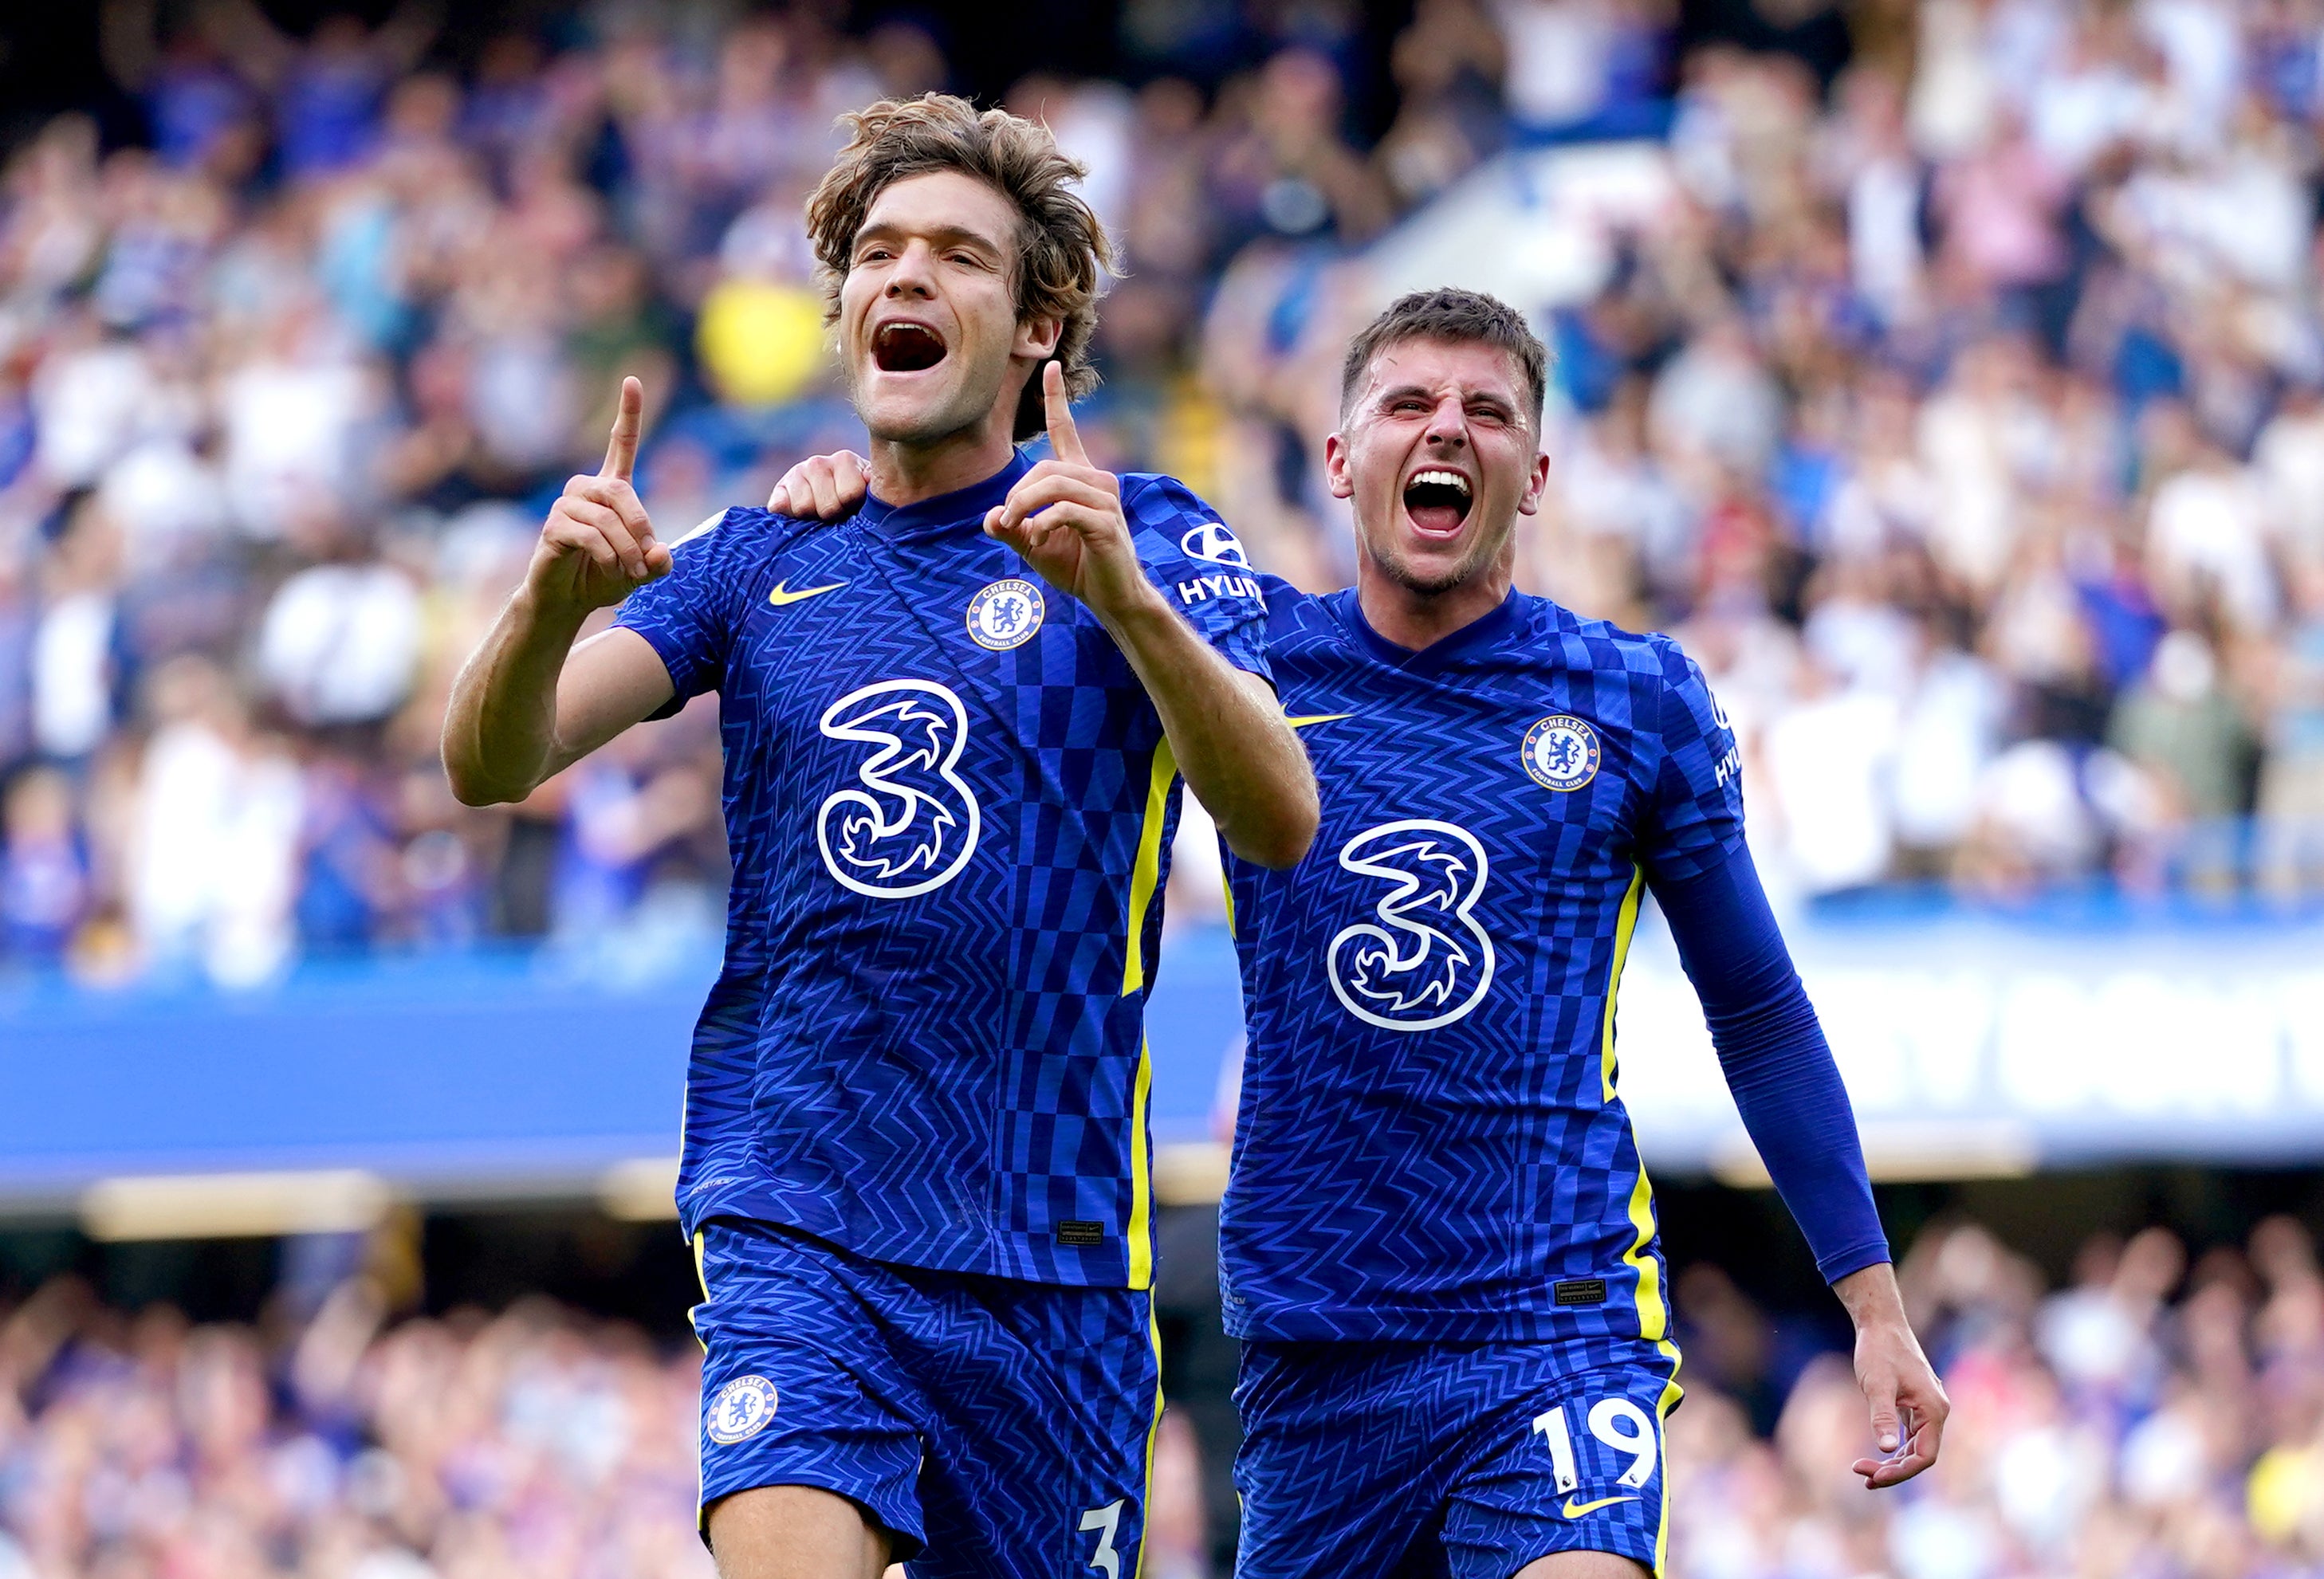 Marcos Alonso scored for Chelsea as they beat Crystal Palace (Tess Derry/PA)